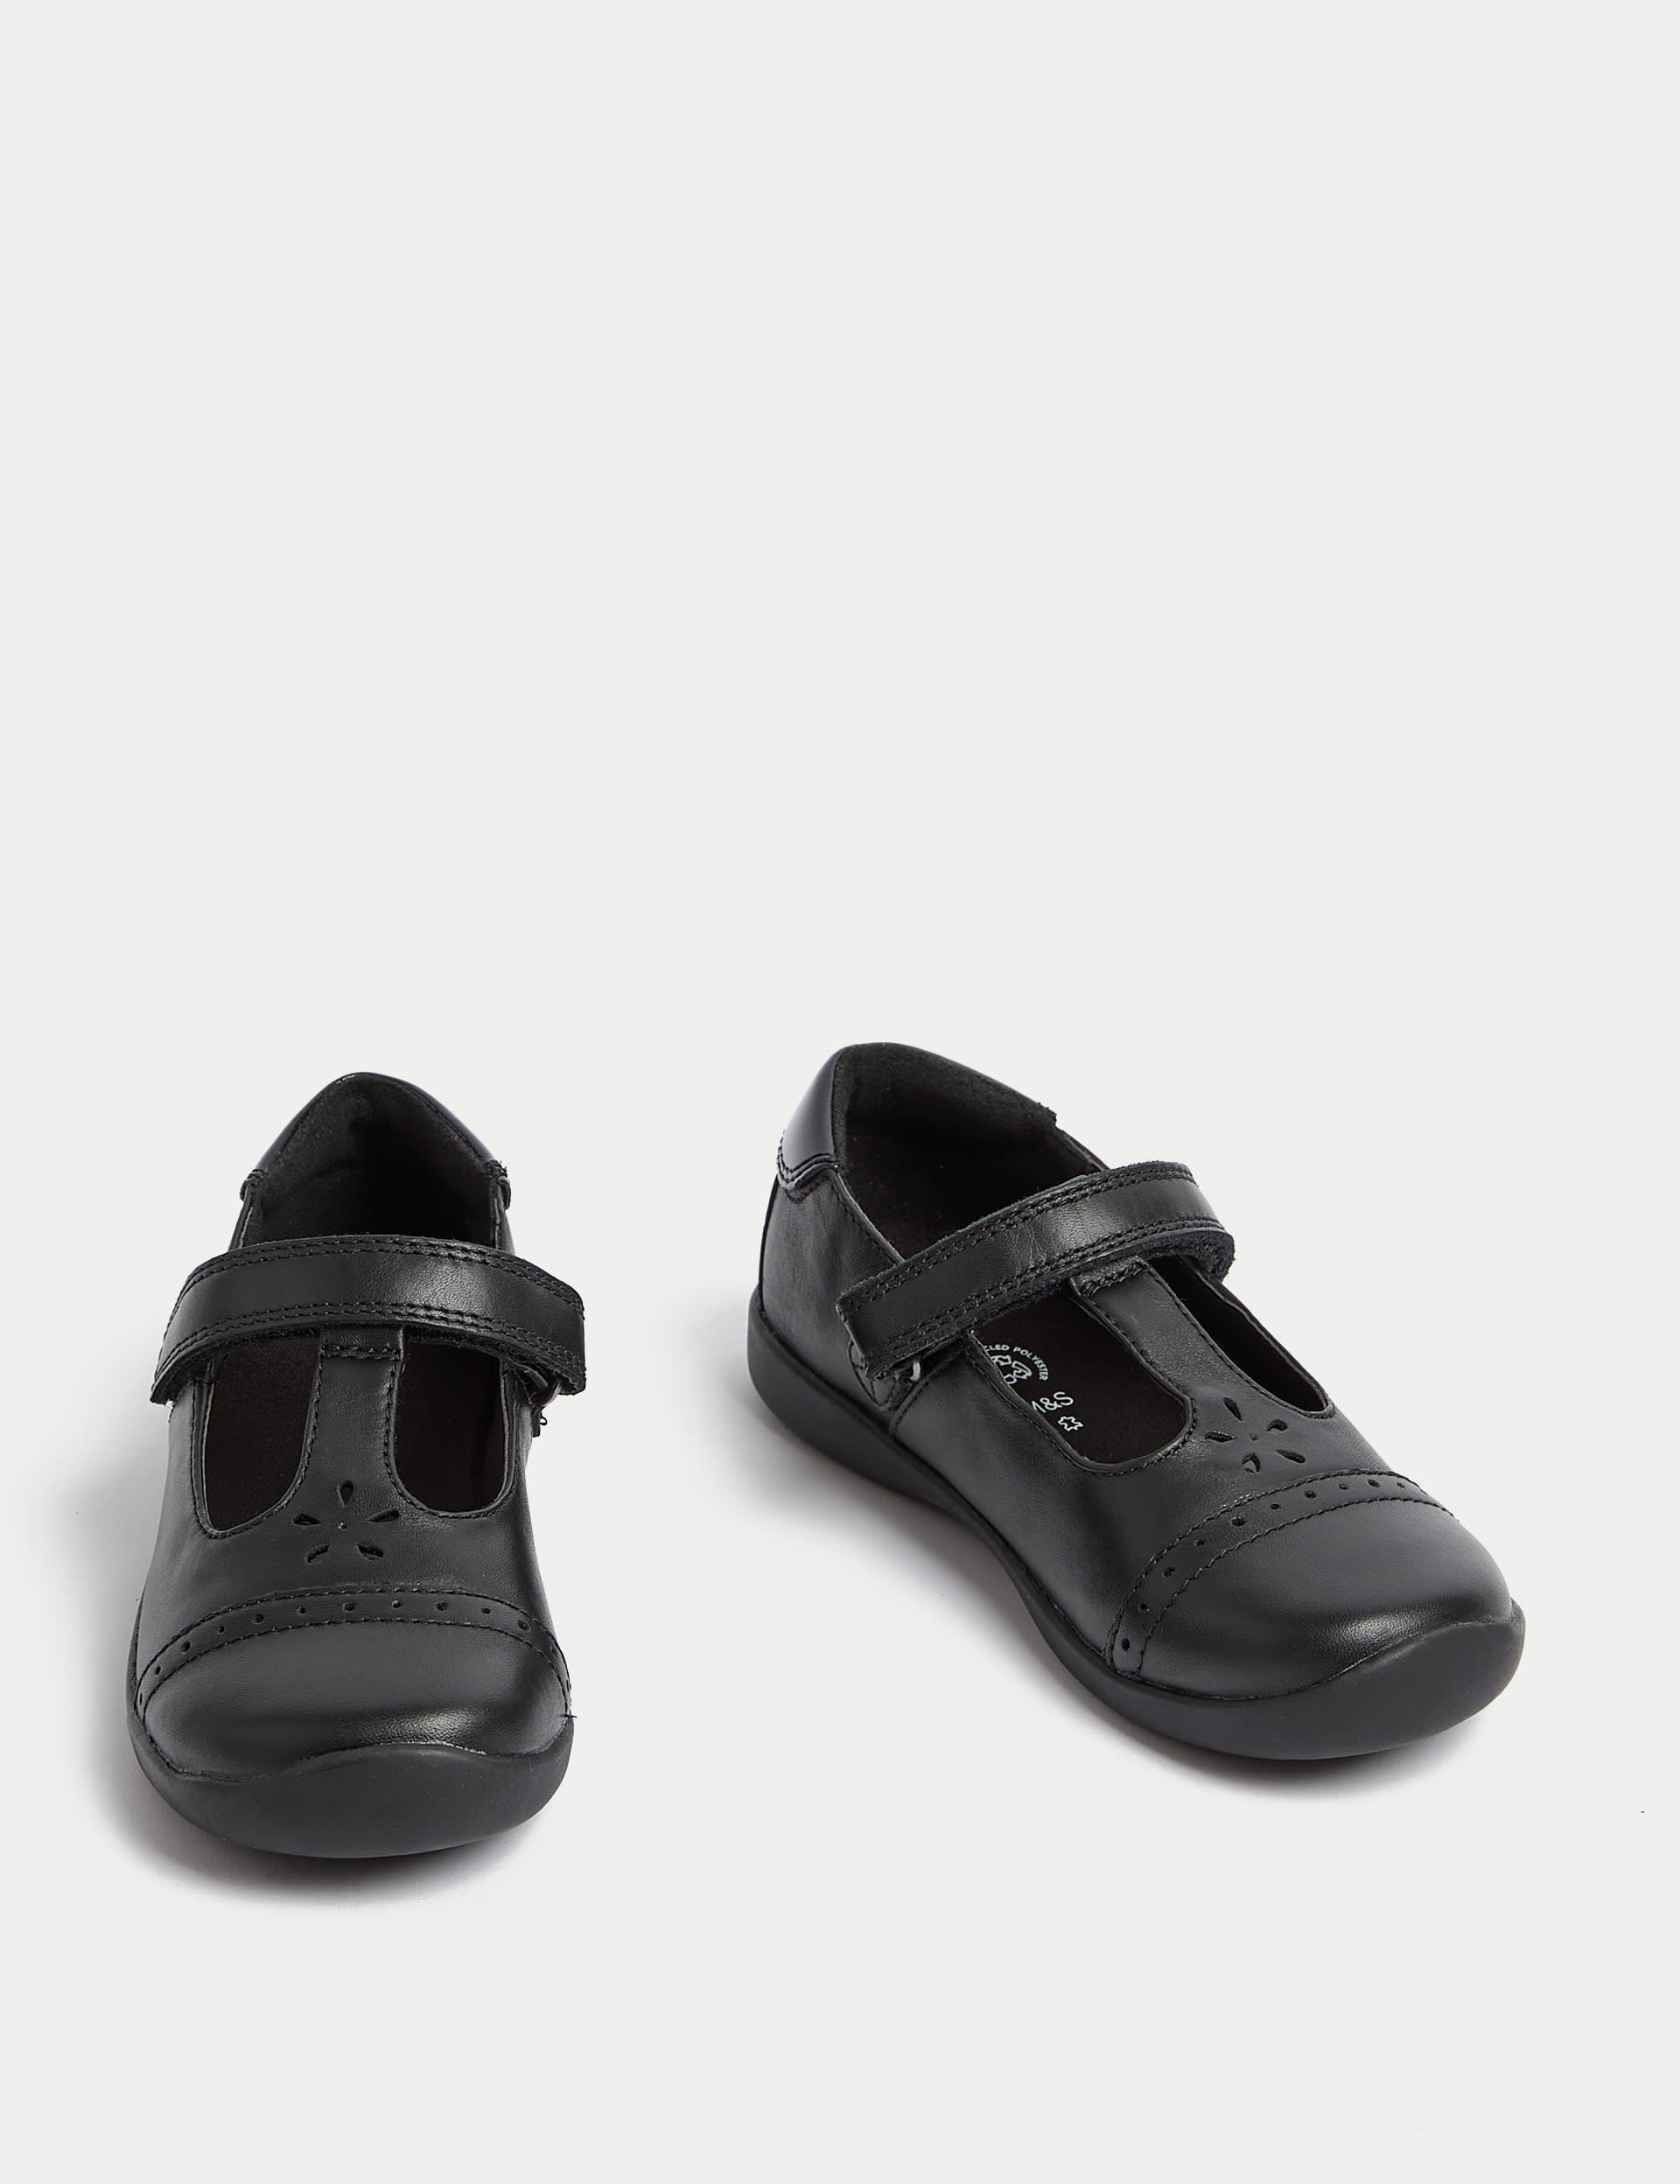 Kids’ Leather T-Bar School Shoes (8 Small - 2 Large)